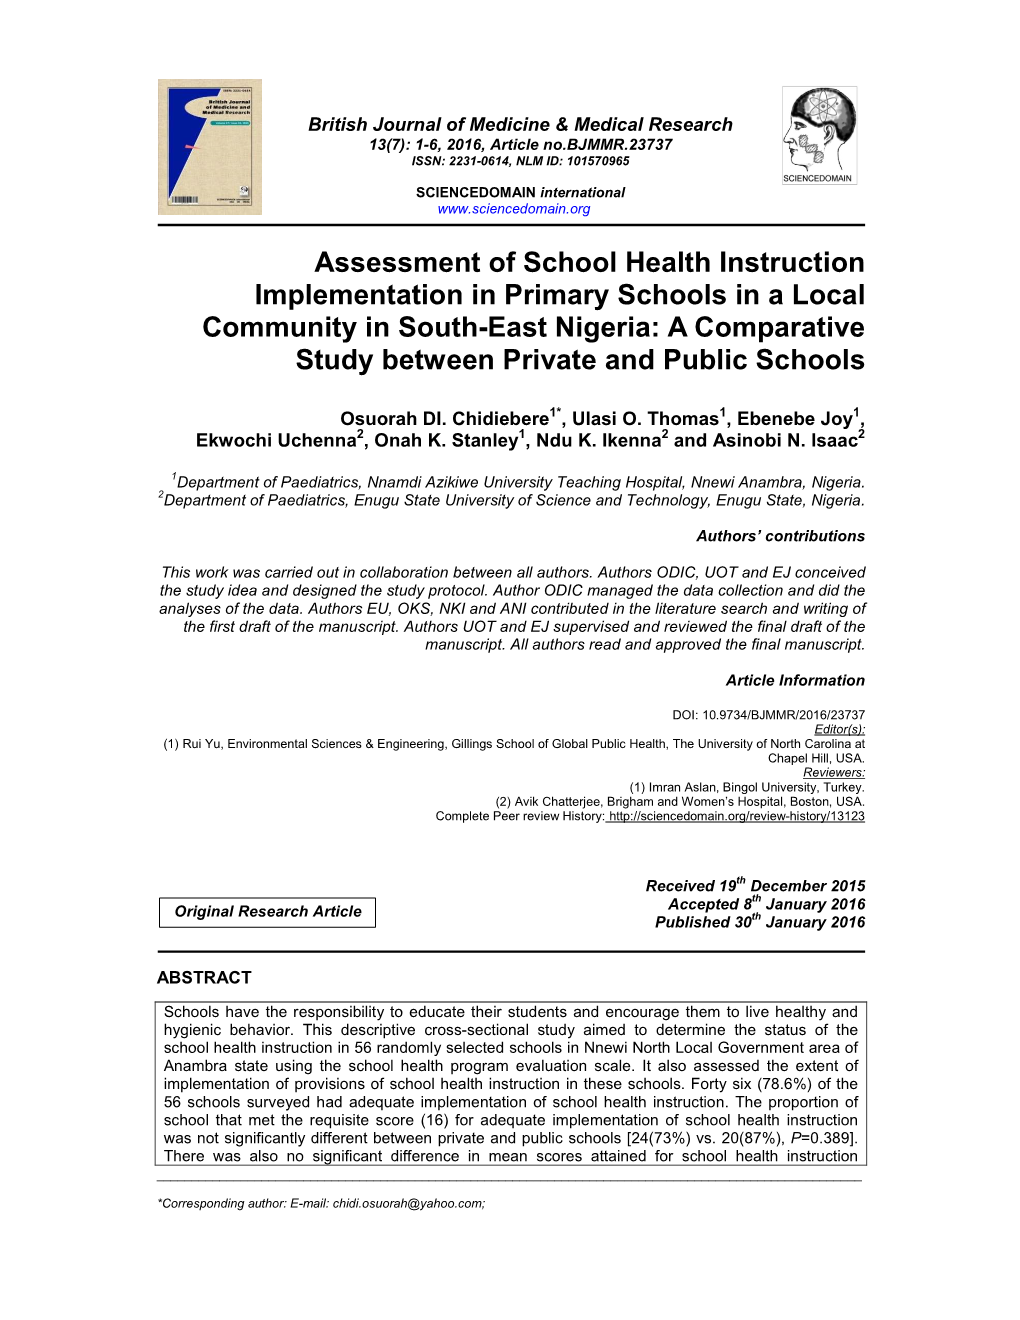 Assessment of School Health Instruction Implementation In